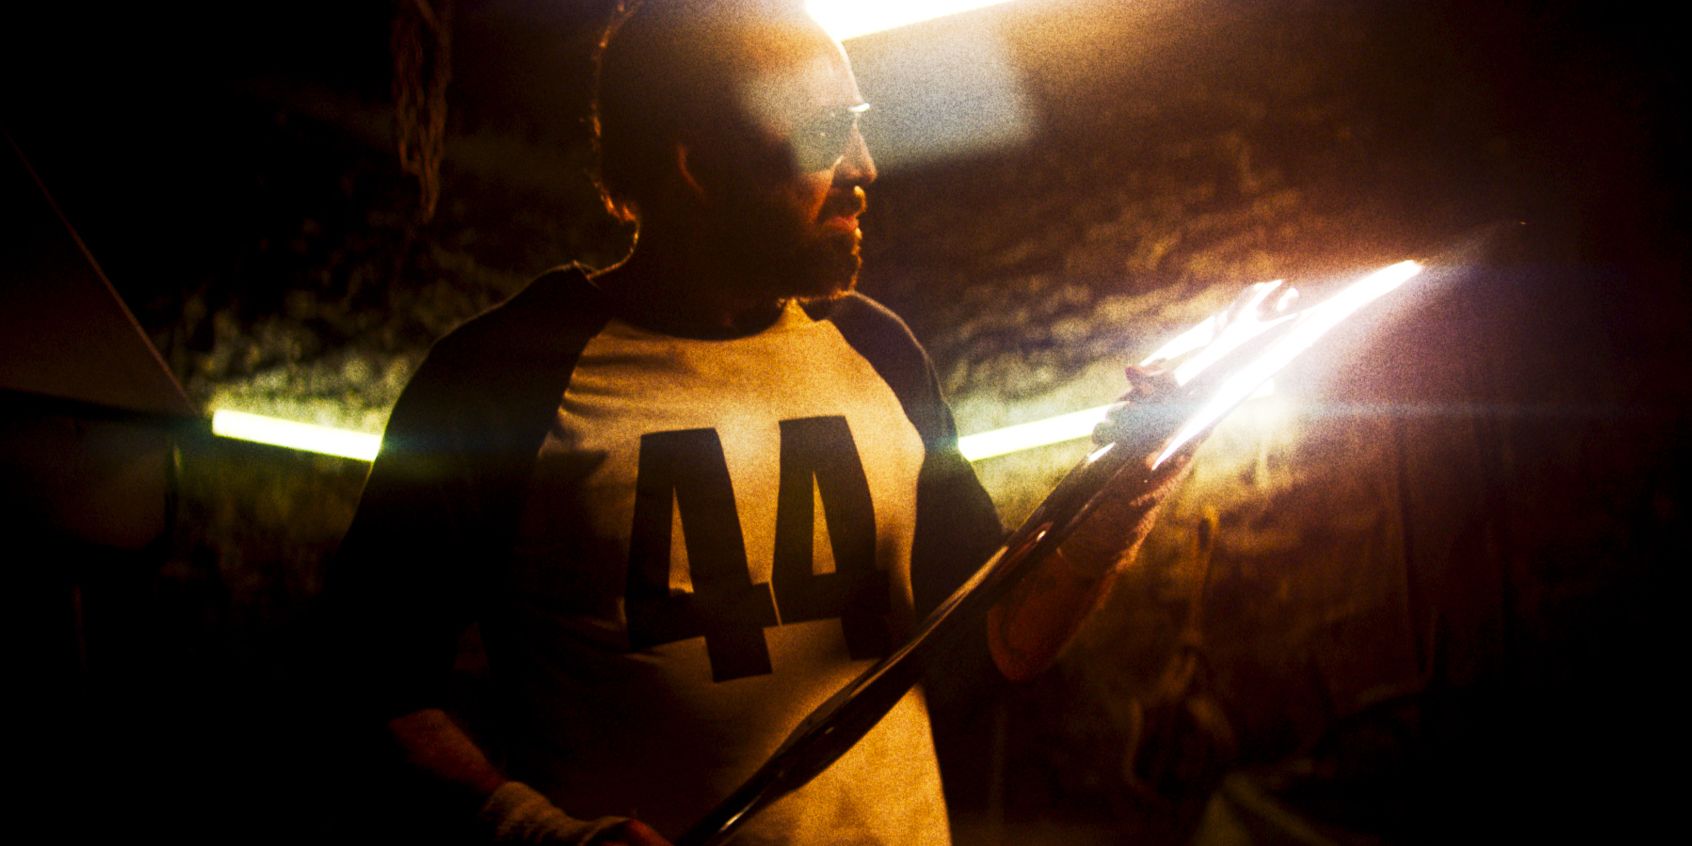 Nicholas Cage holding an axe in Mandy